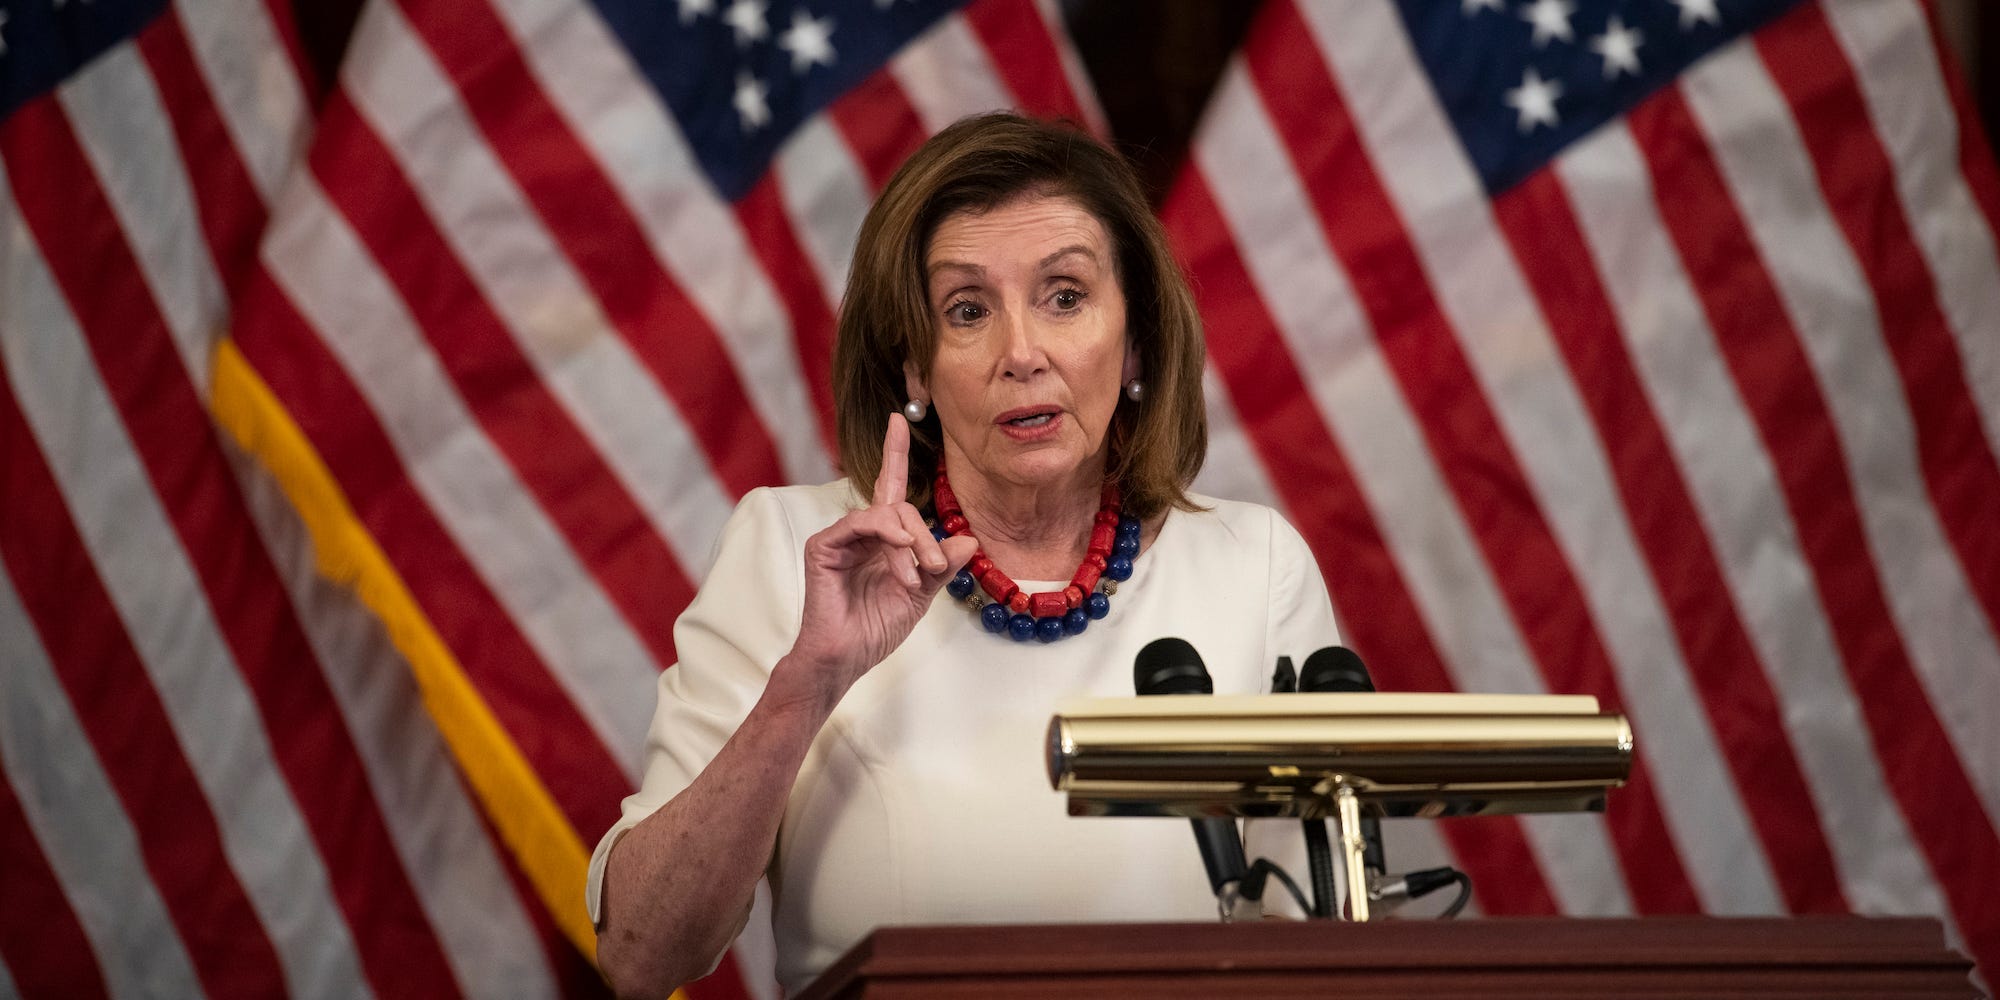 House Speaker Nancy Pelosi at her weekly press conference on January 20, 2021.